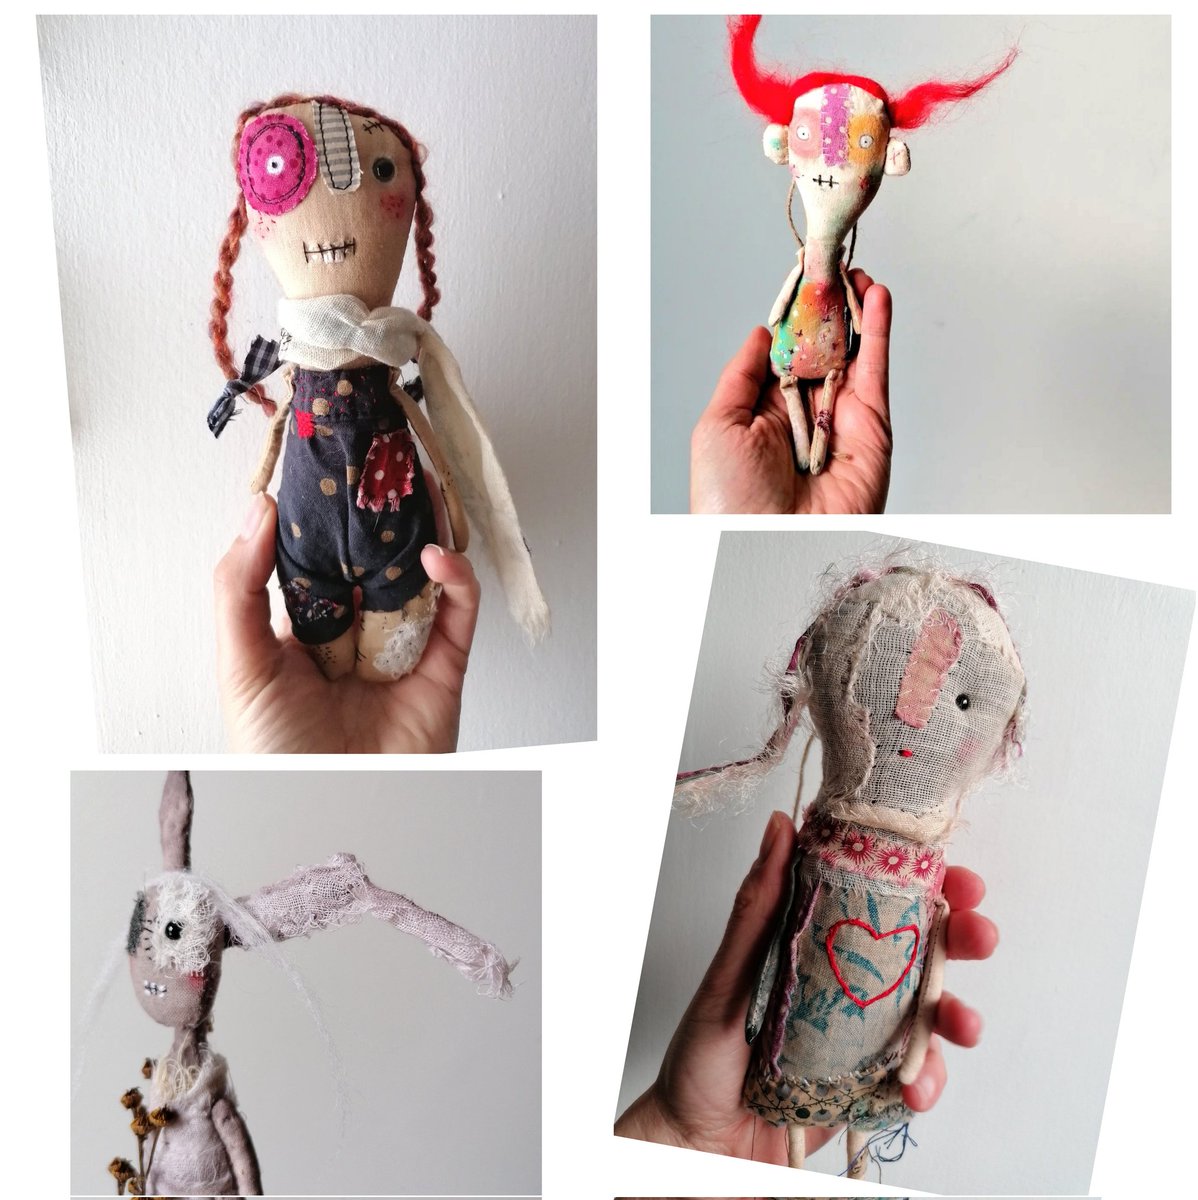 Spring Sale on my website🌿🌸🌿 All my little dolls are unique and original textiles artworks, ready to be displayed on your walls. Apply Spring24 at checkout for 10%off littlebirdofparadise.bigcartel.com #mhhsbd #CraftBizParty #earlybiz